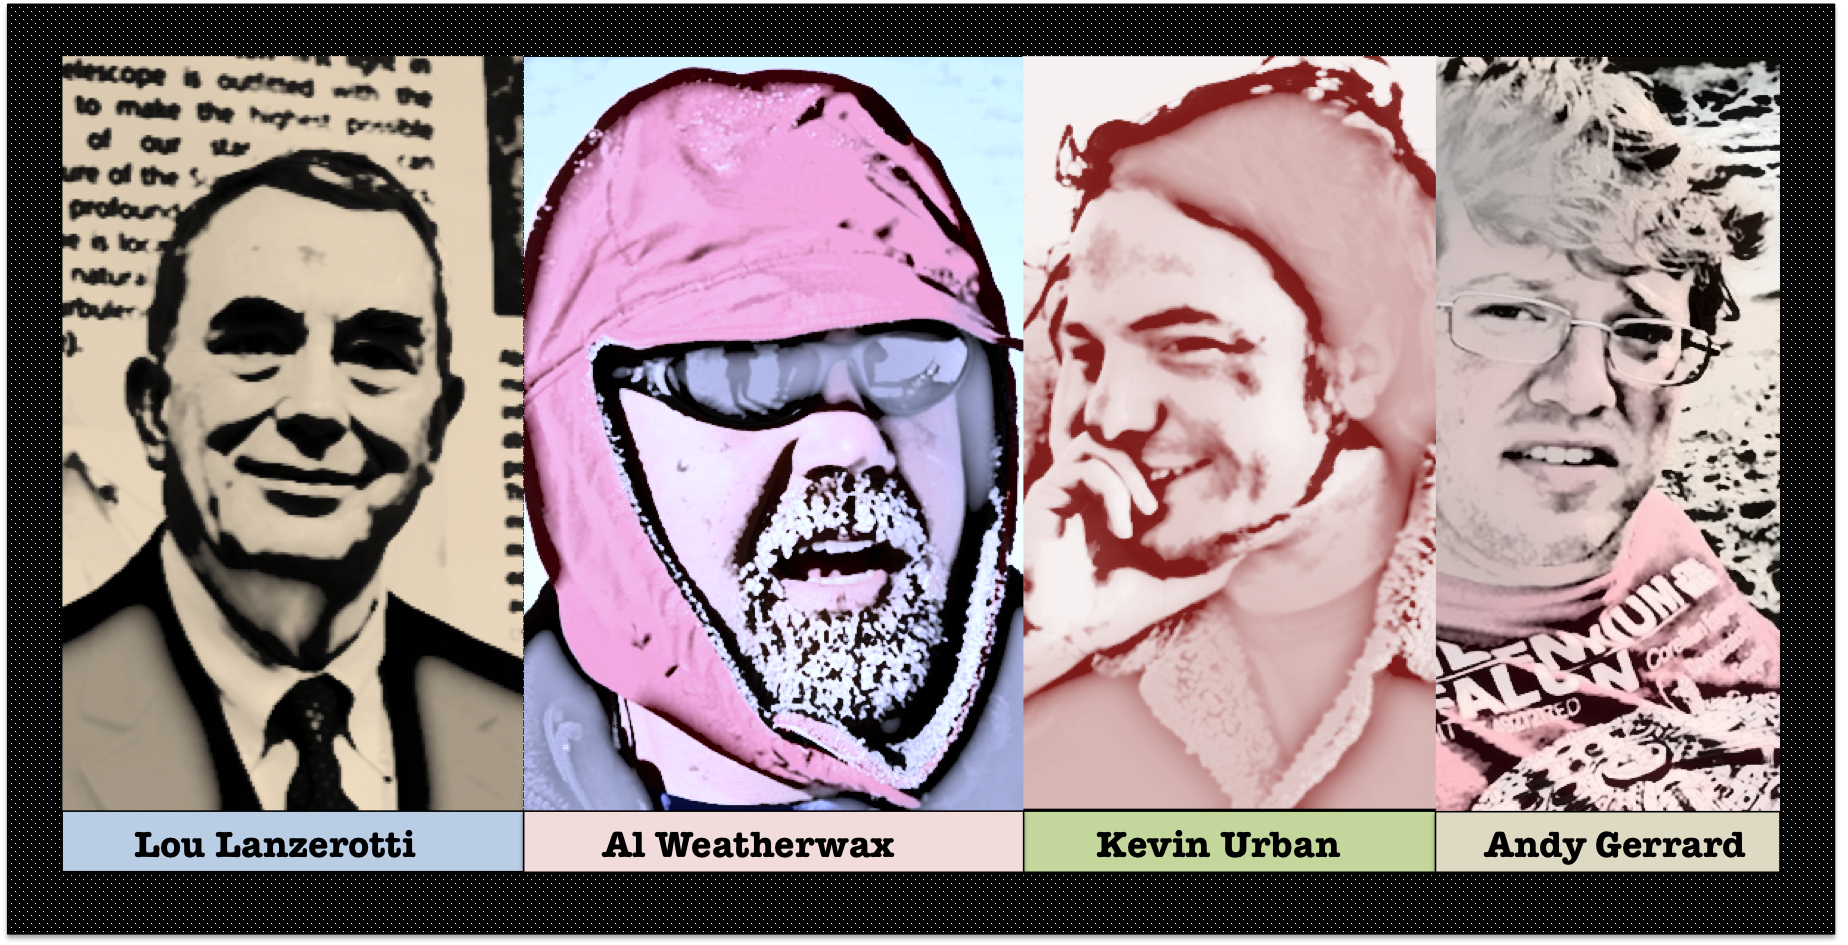 My current band of authors: The Hydromagnetix